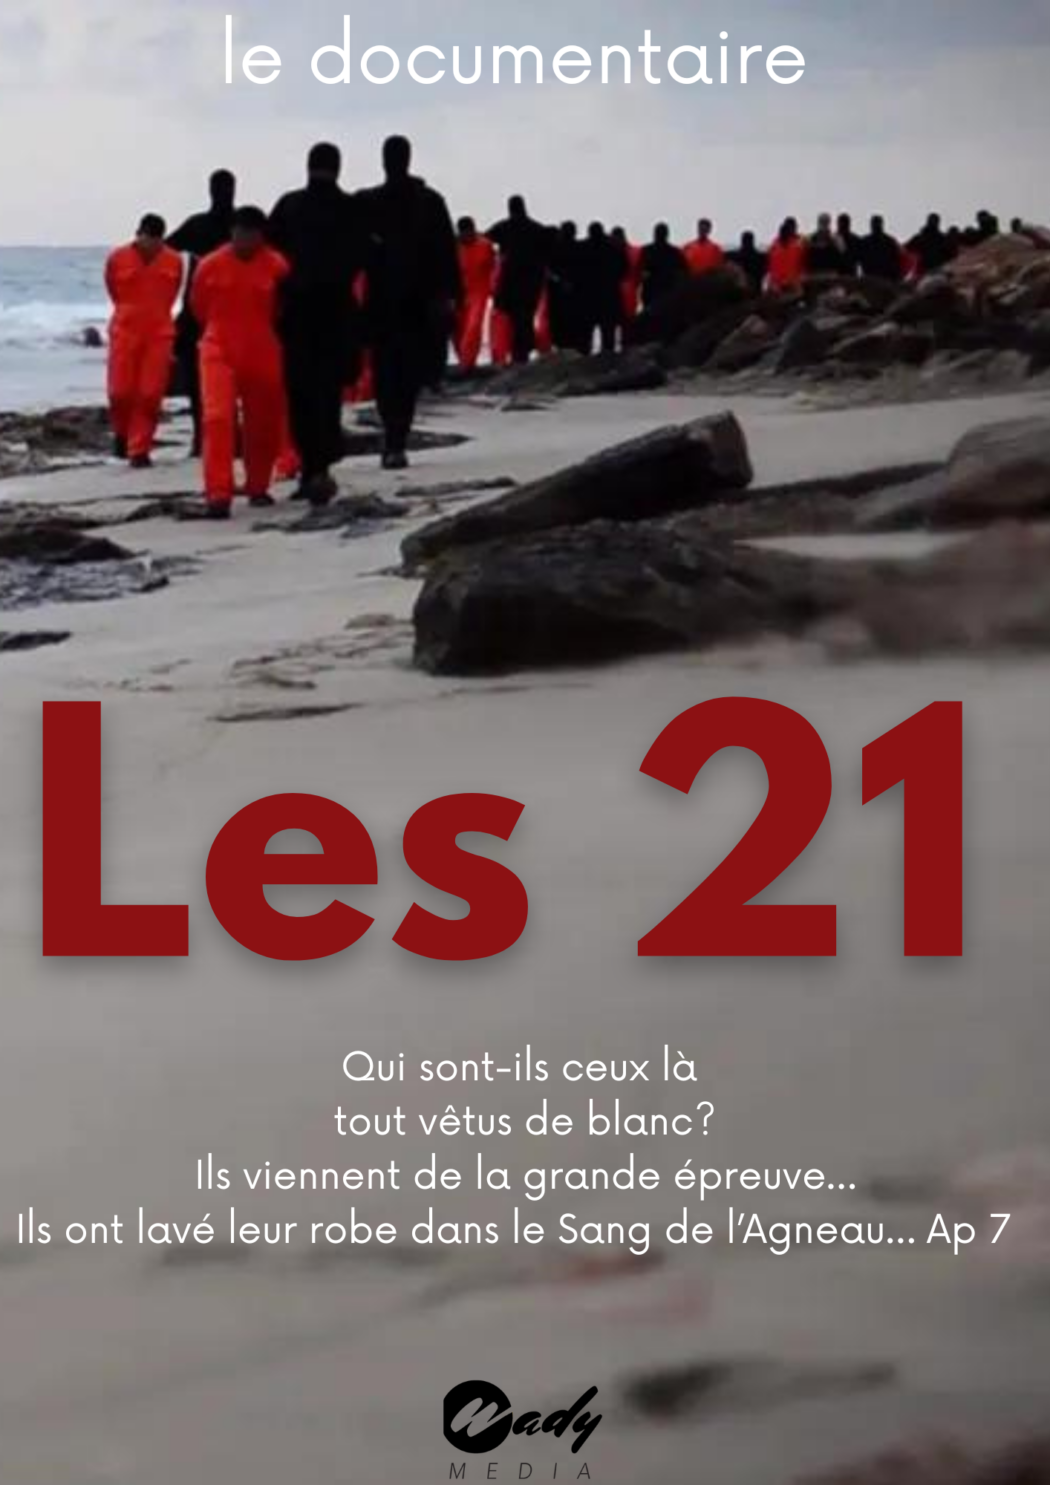 Les 21 martyrs